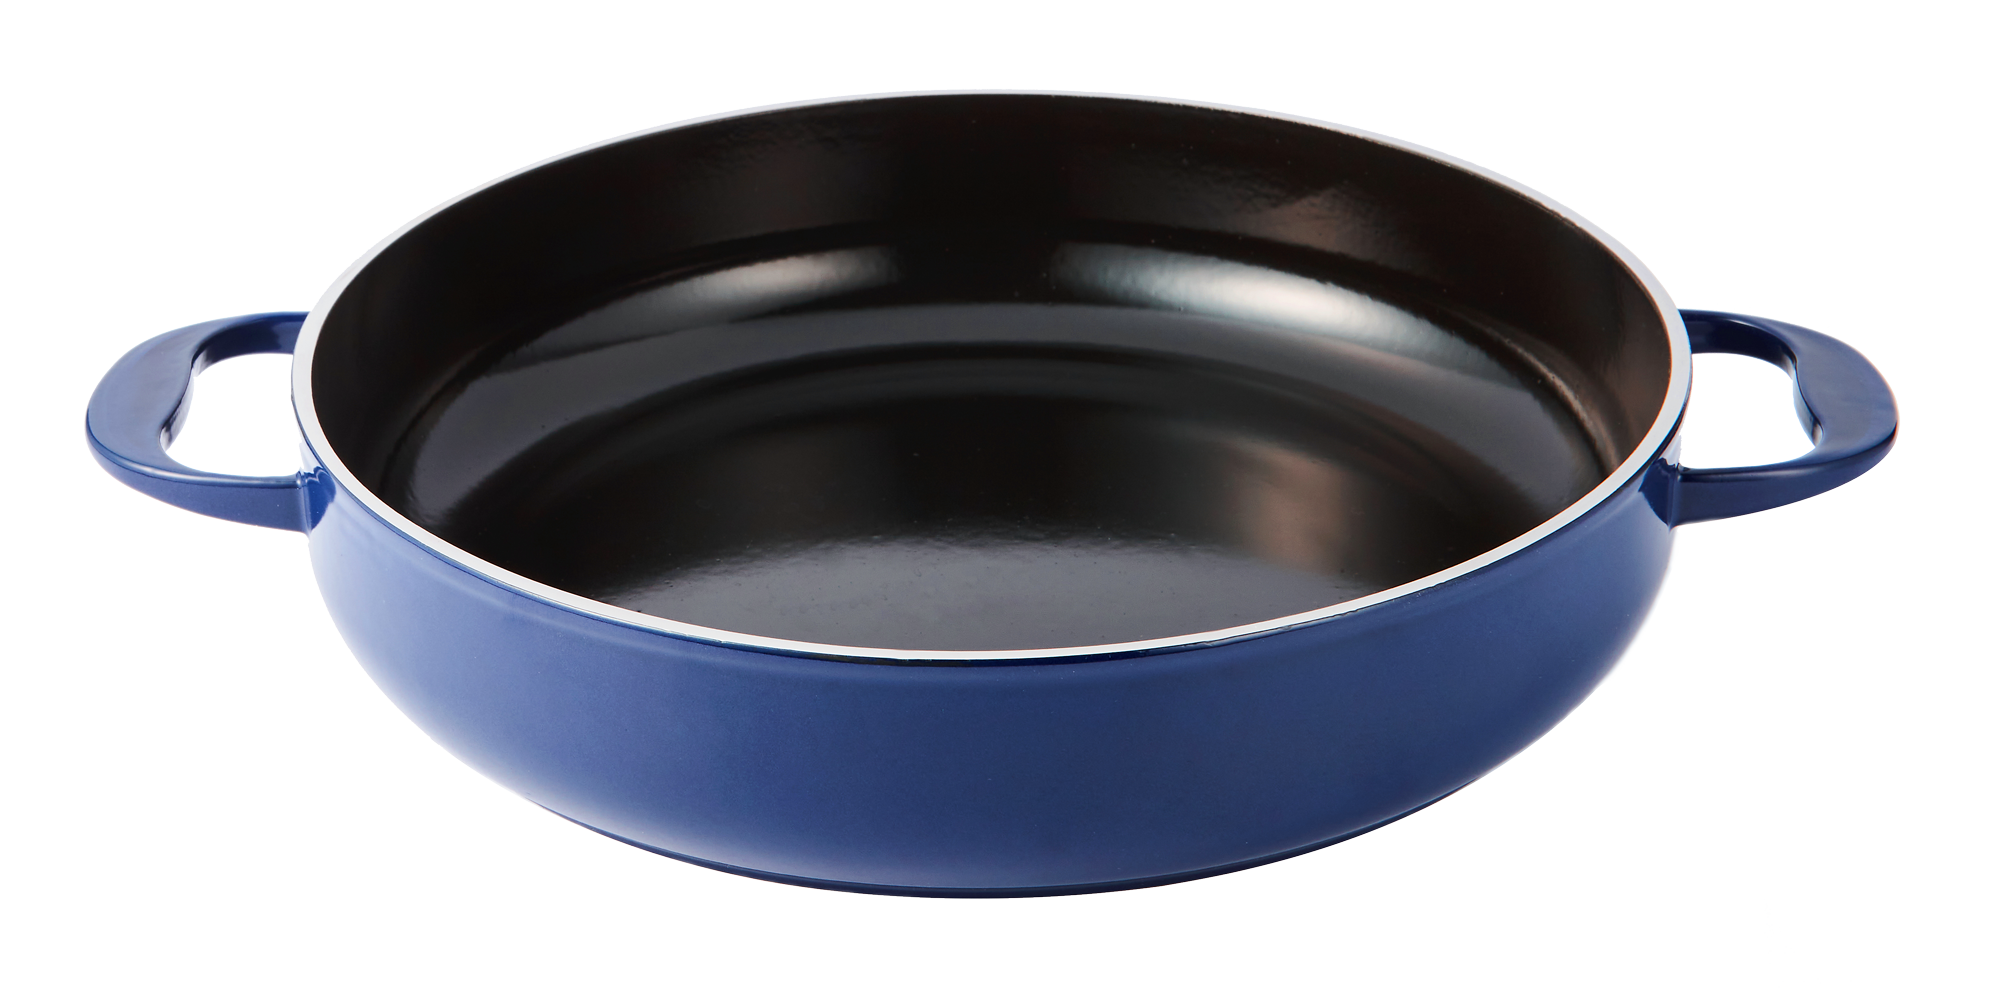 Hesslebach Cookware 10 inch Braiser Pan Unique State-of-the-art